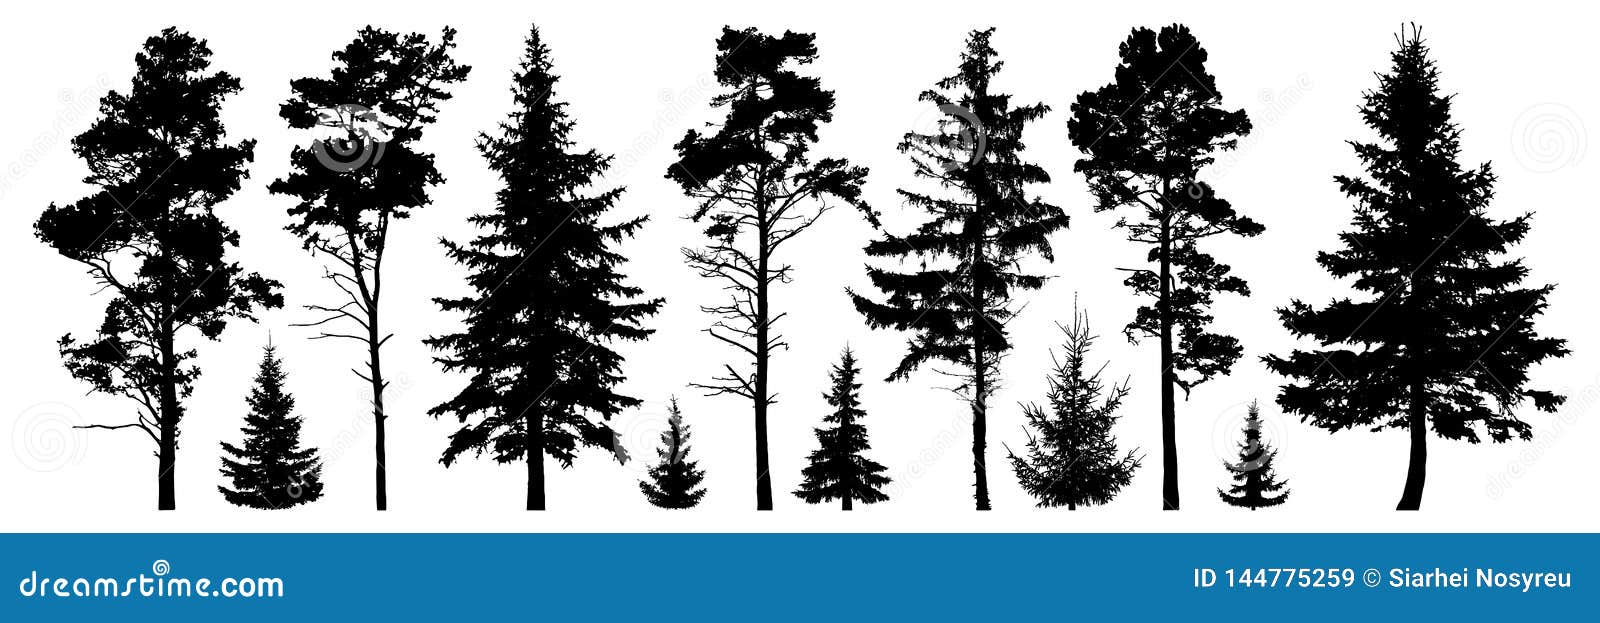 forest evergreen trees silhouette  set